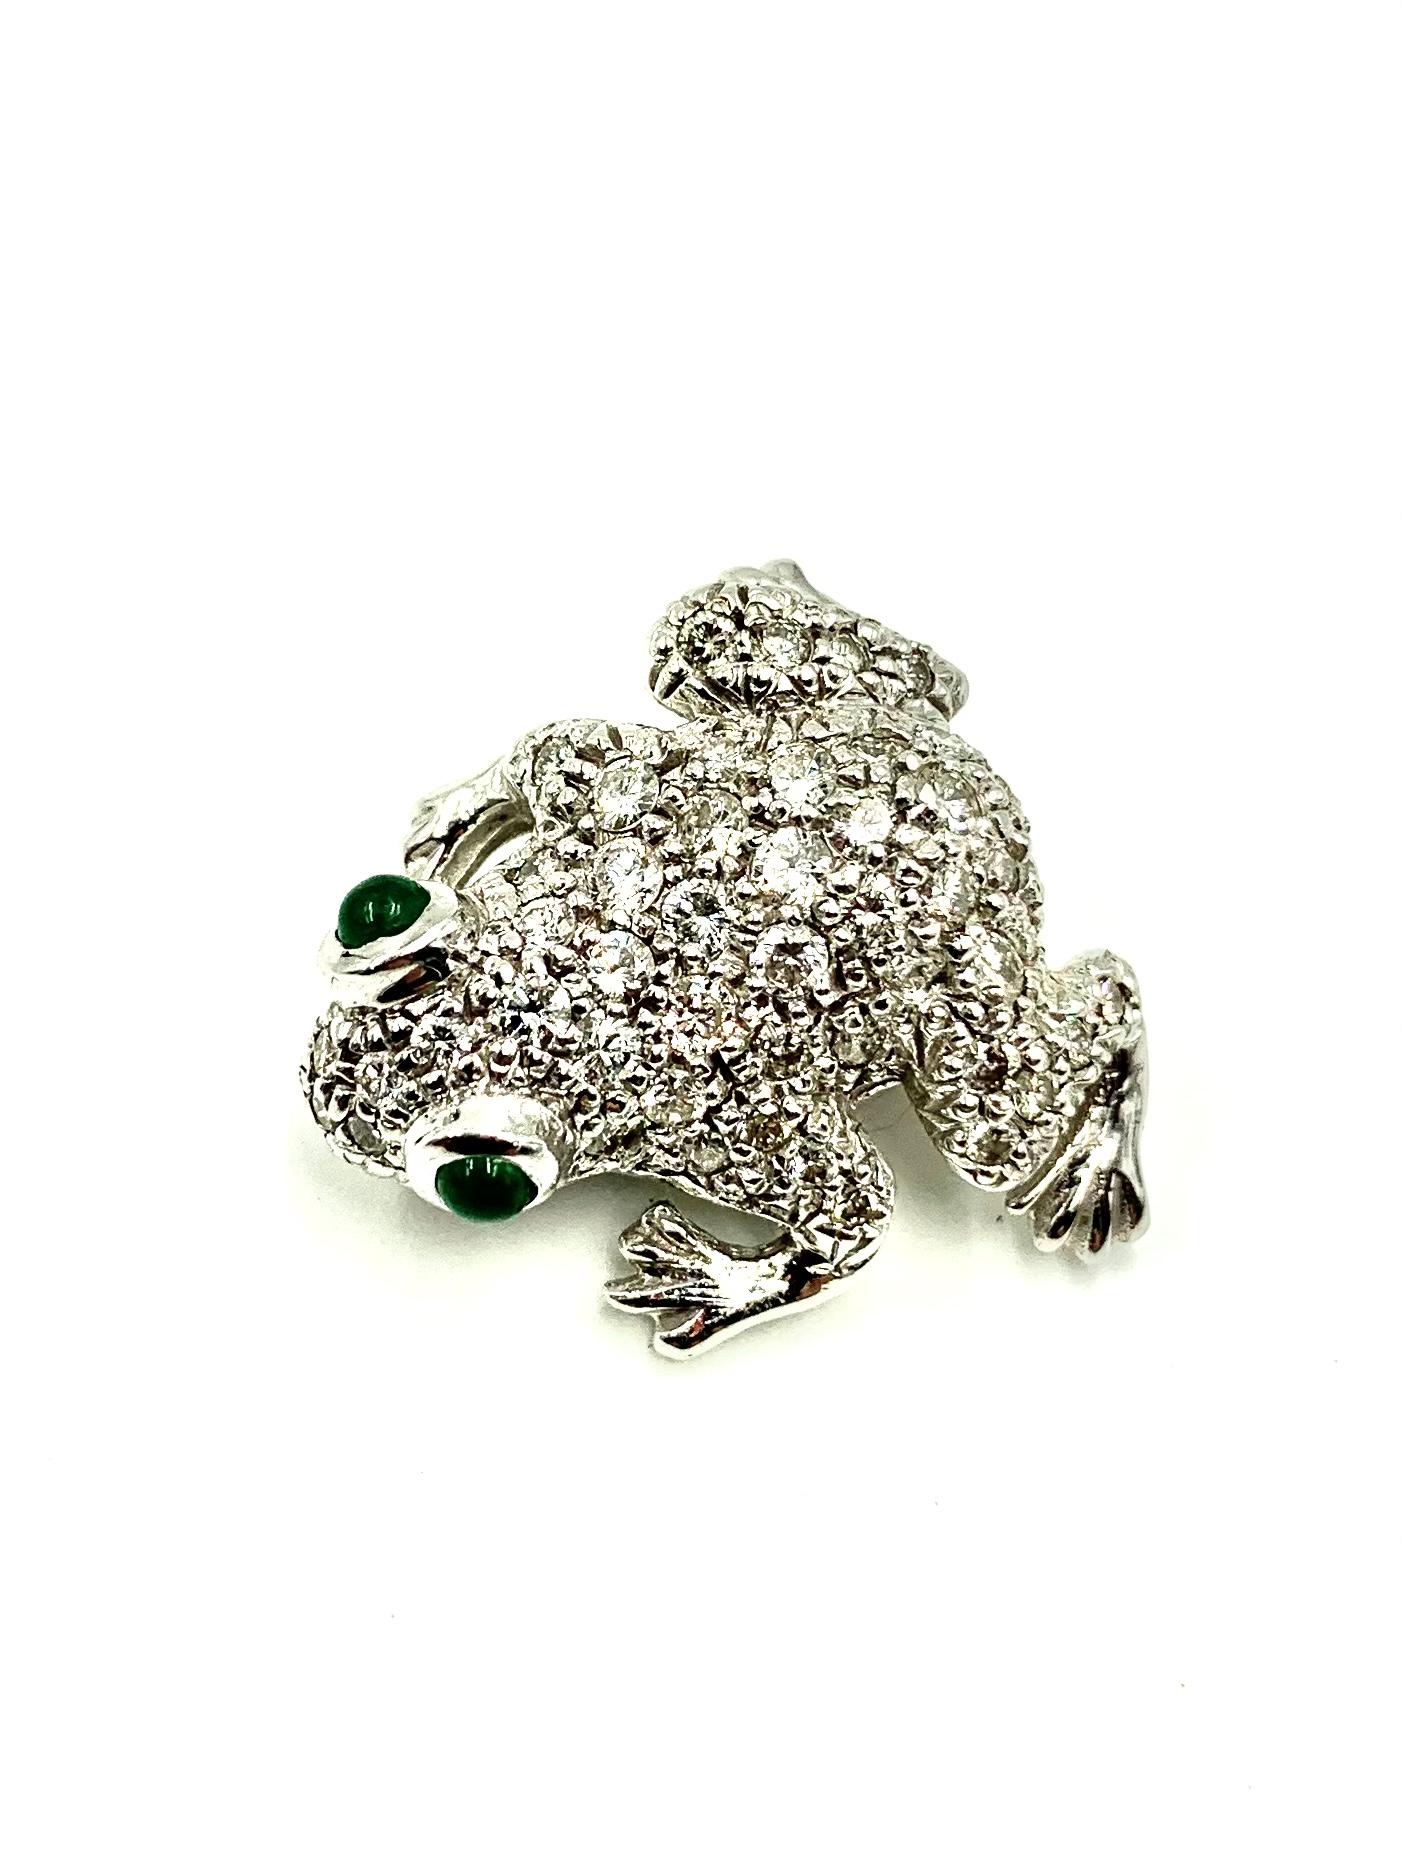 Diamond 18K White Gold Frog Brooch, Pendant with Cabochon Emerald Eyes, Talisman In Good Condition For Sale In New York, NY